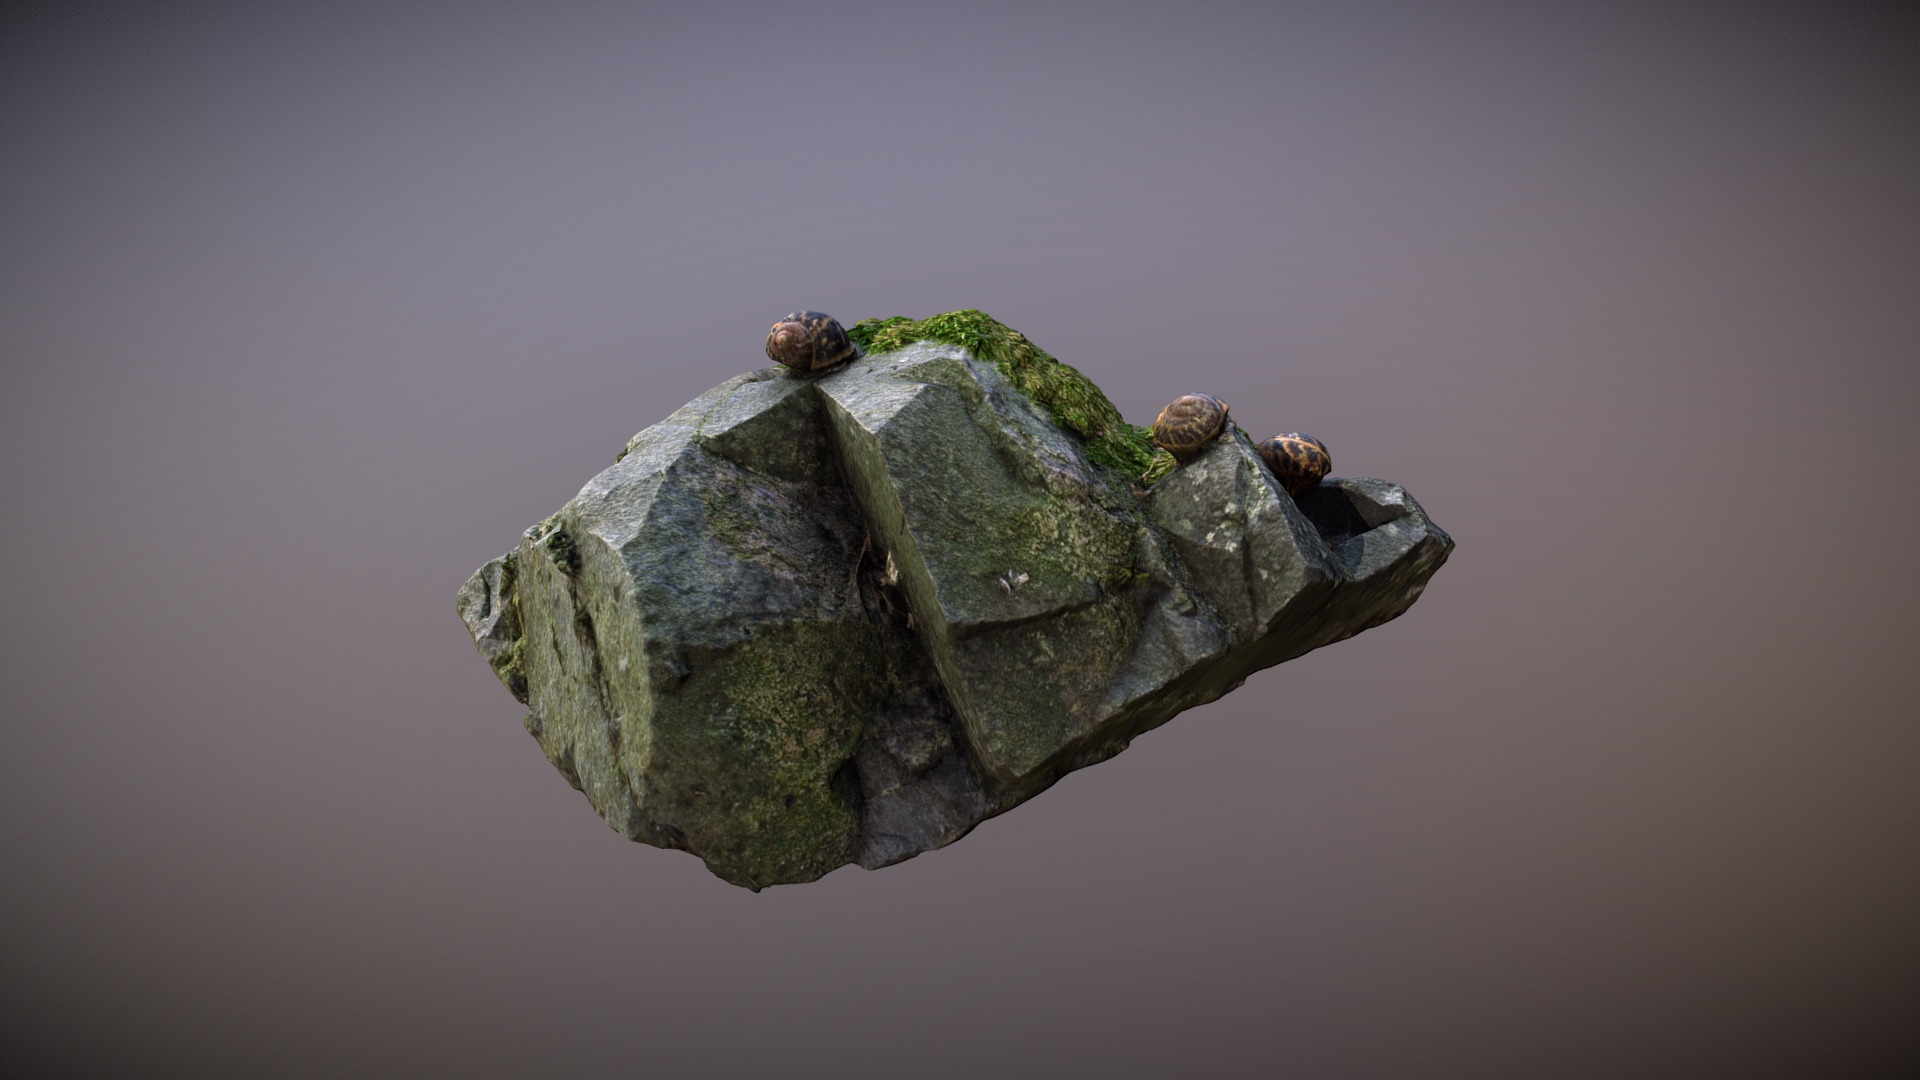 3D model Snails on Mossy Rock - This is a 3D model of the Snails on Mossy Rock. The 3D model is about a rock with a couple of small turtles on top.